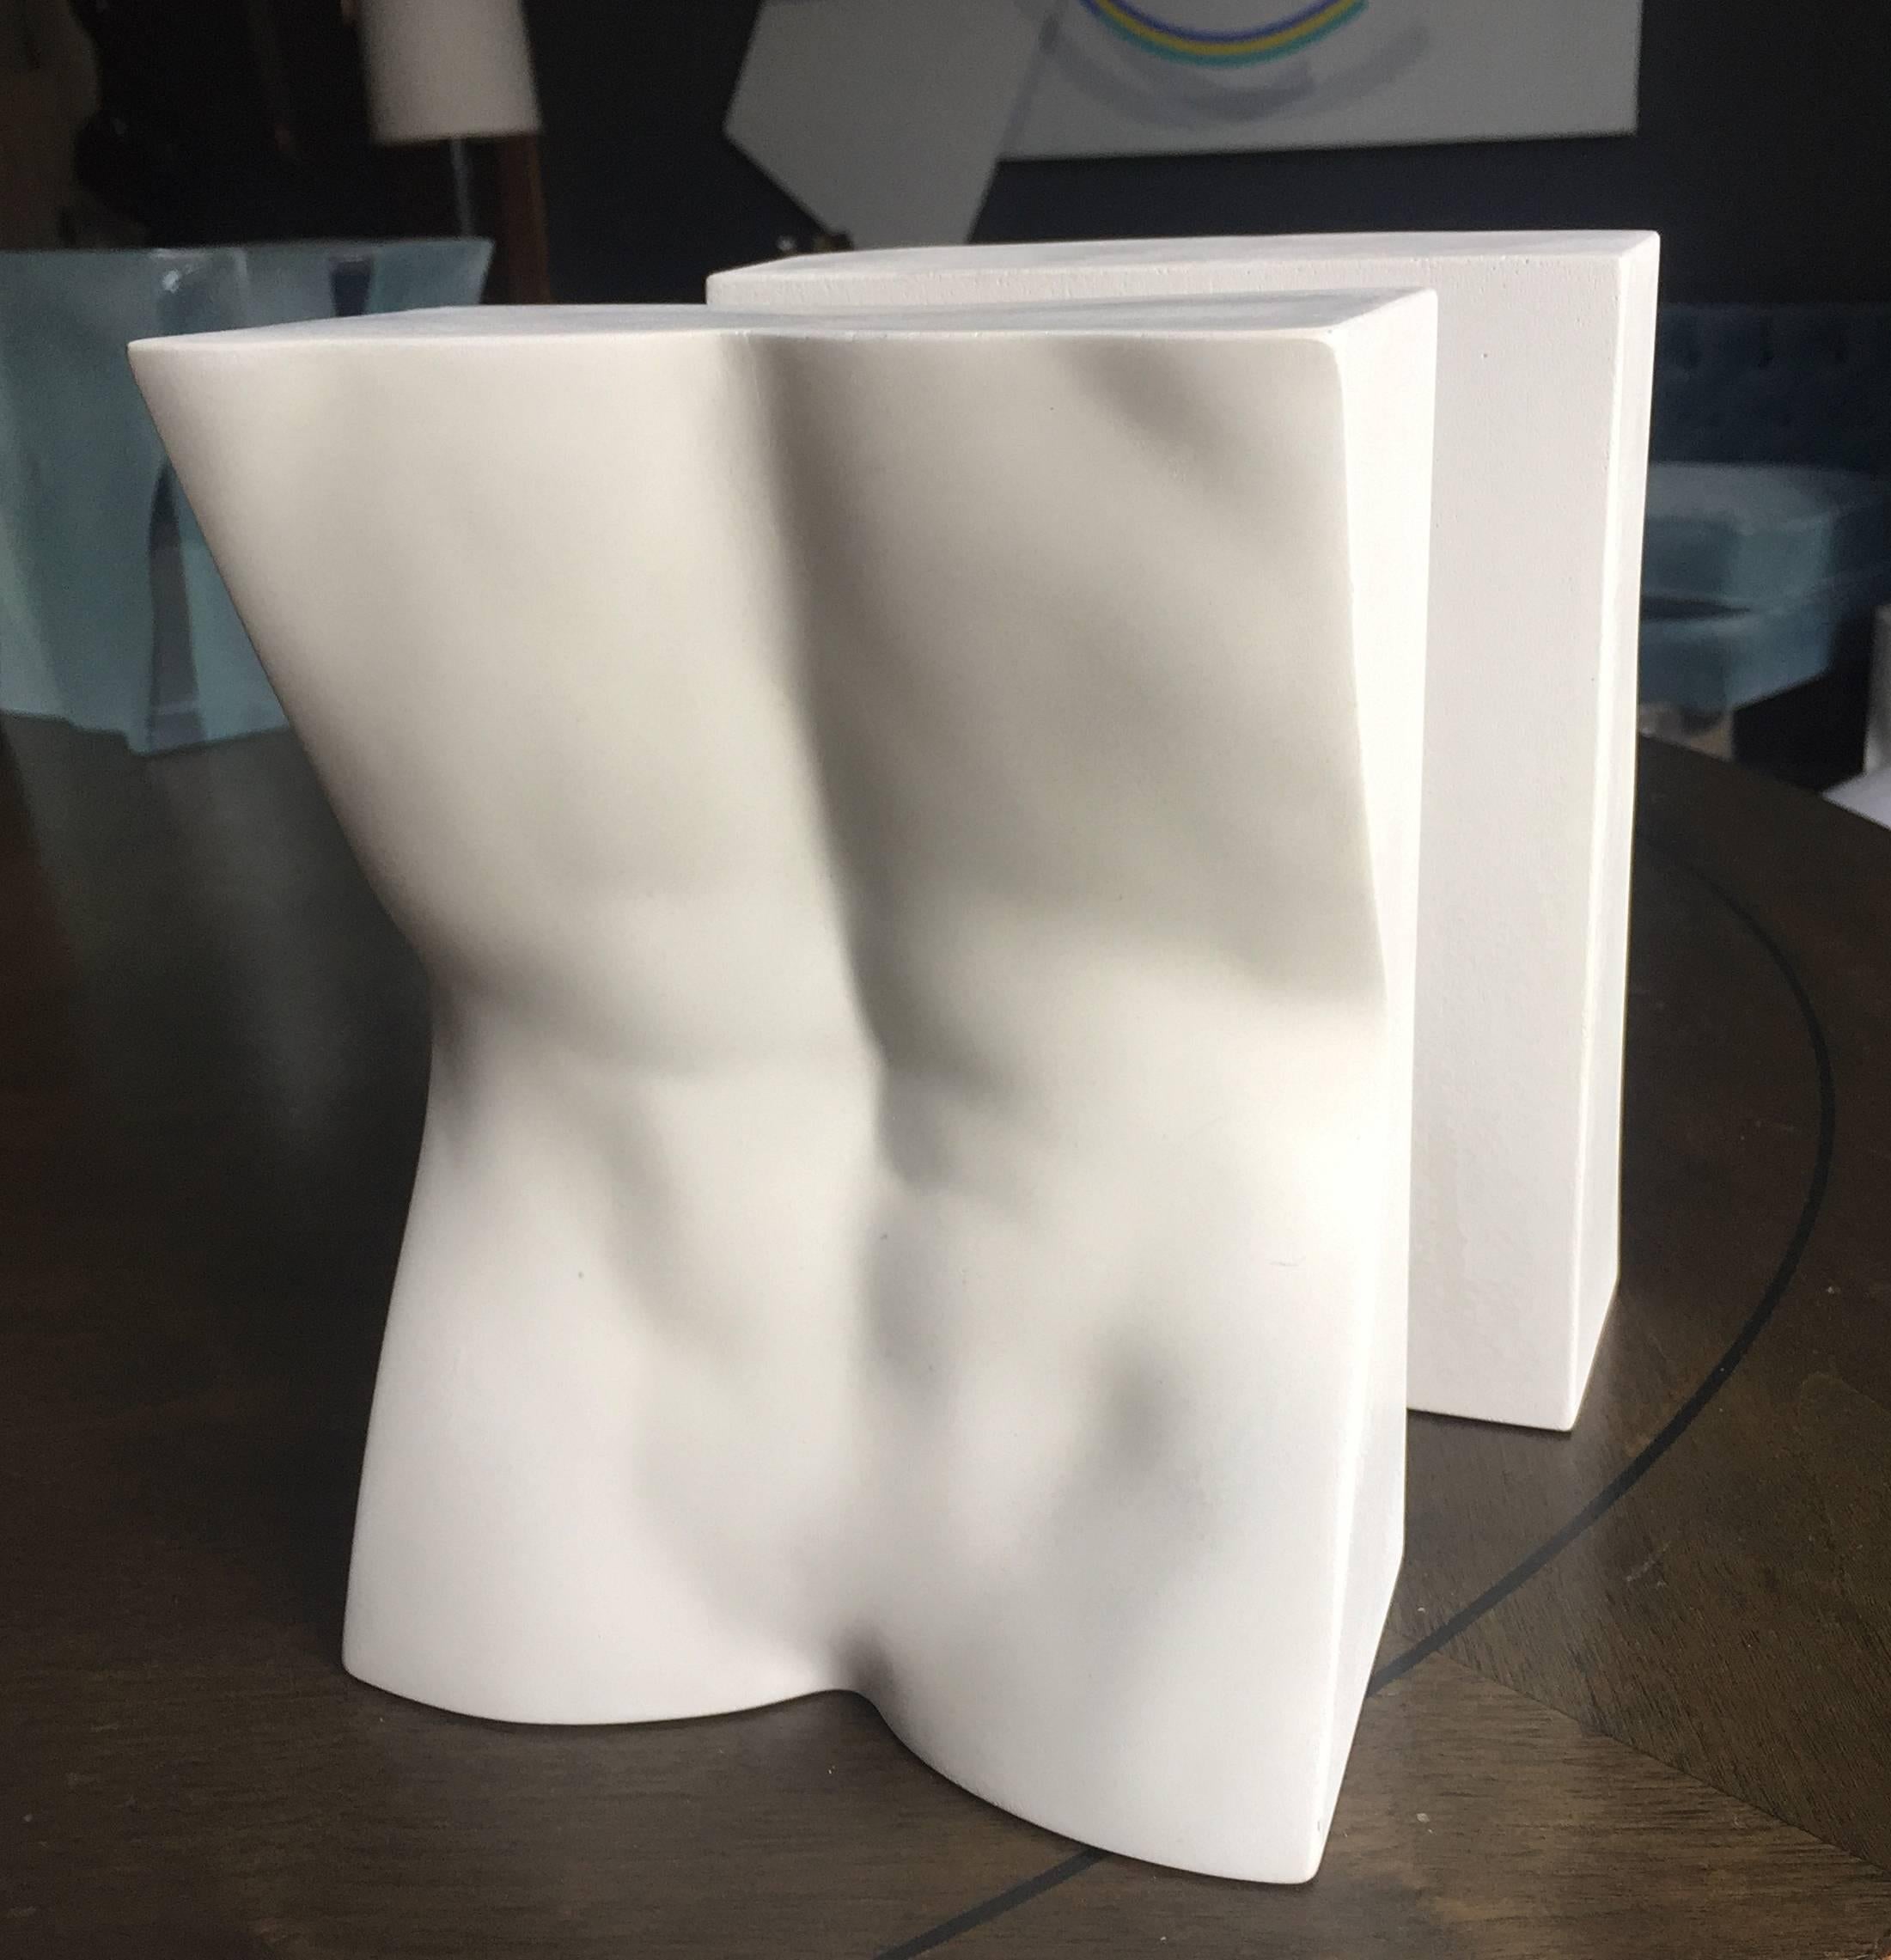 
Artist: Tanya Ragir
Date Created: 2017
Edition #: 4/25

Introducing the exquisite Cast Stone Bookends Sculpture by Tanya Ragir #4/25- a stunning addition to your home or office décor. These unique bookends are meticulously sculpted to capture the